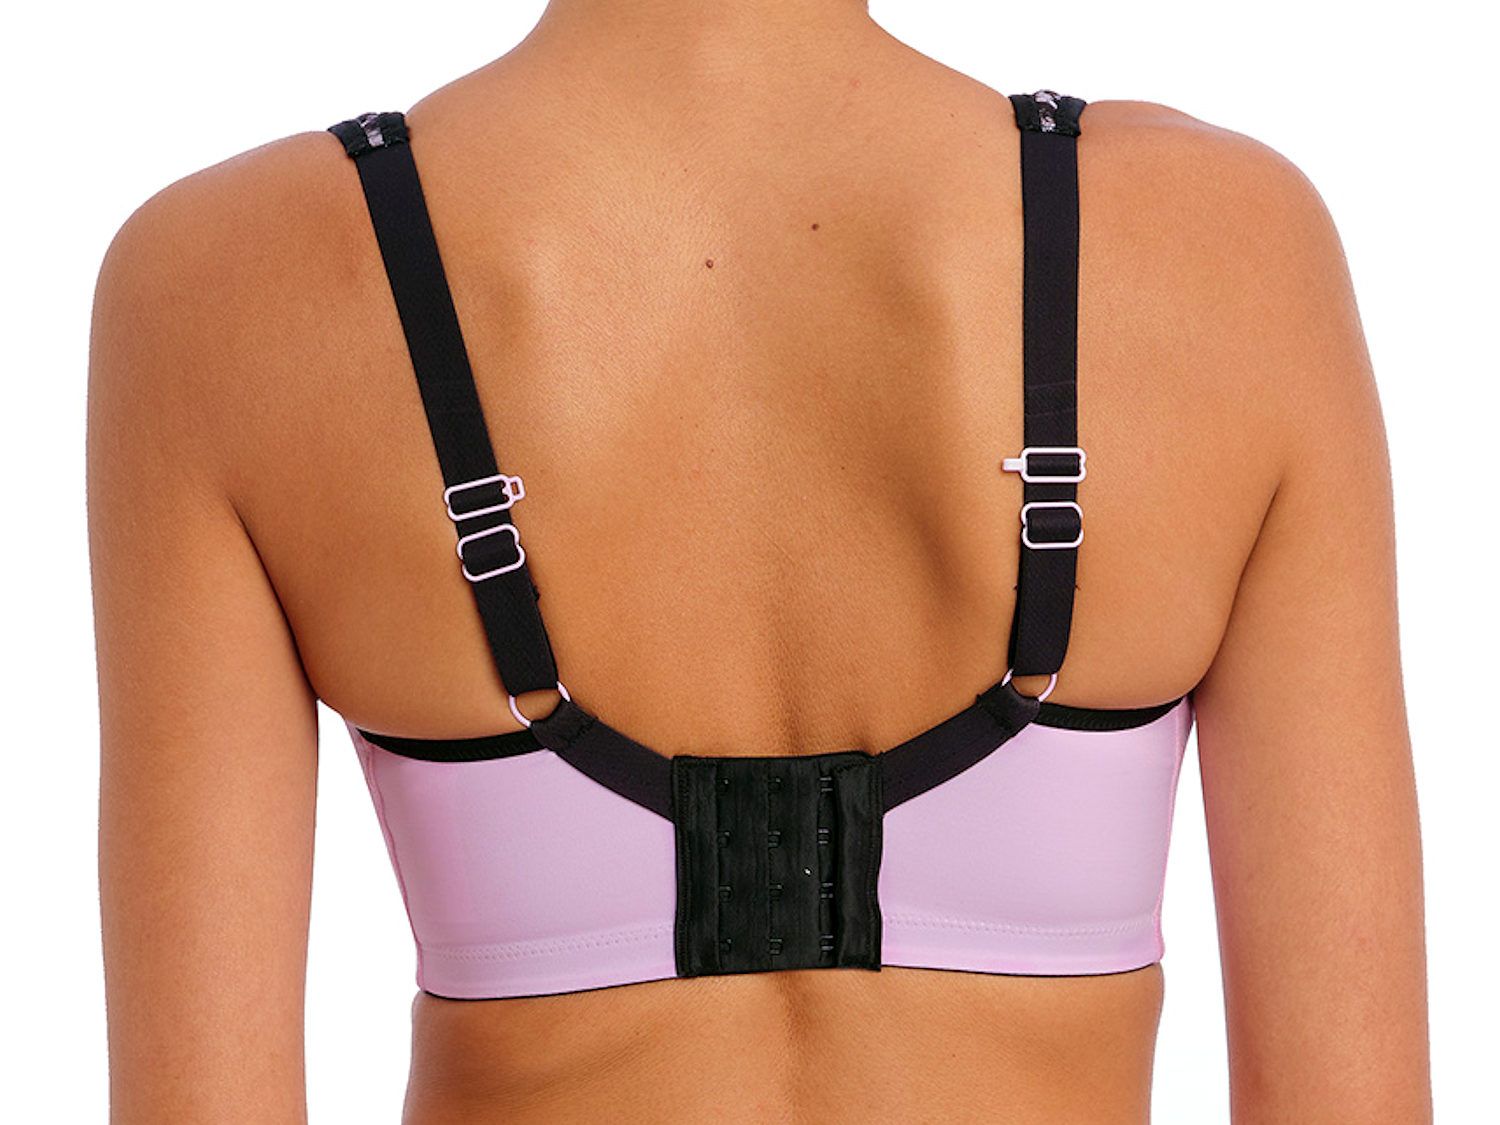 FREYA SONIC STORM MOULDED SPACER SPORTS BRA